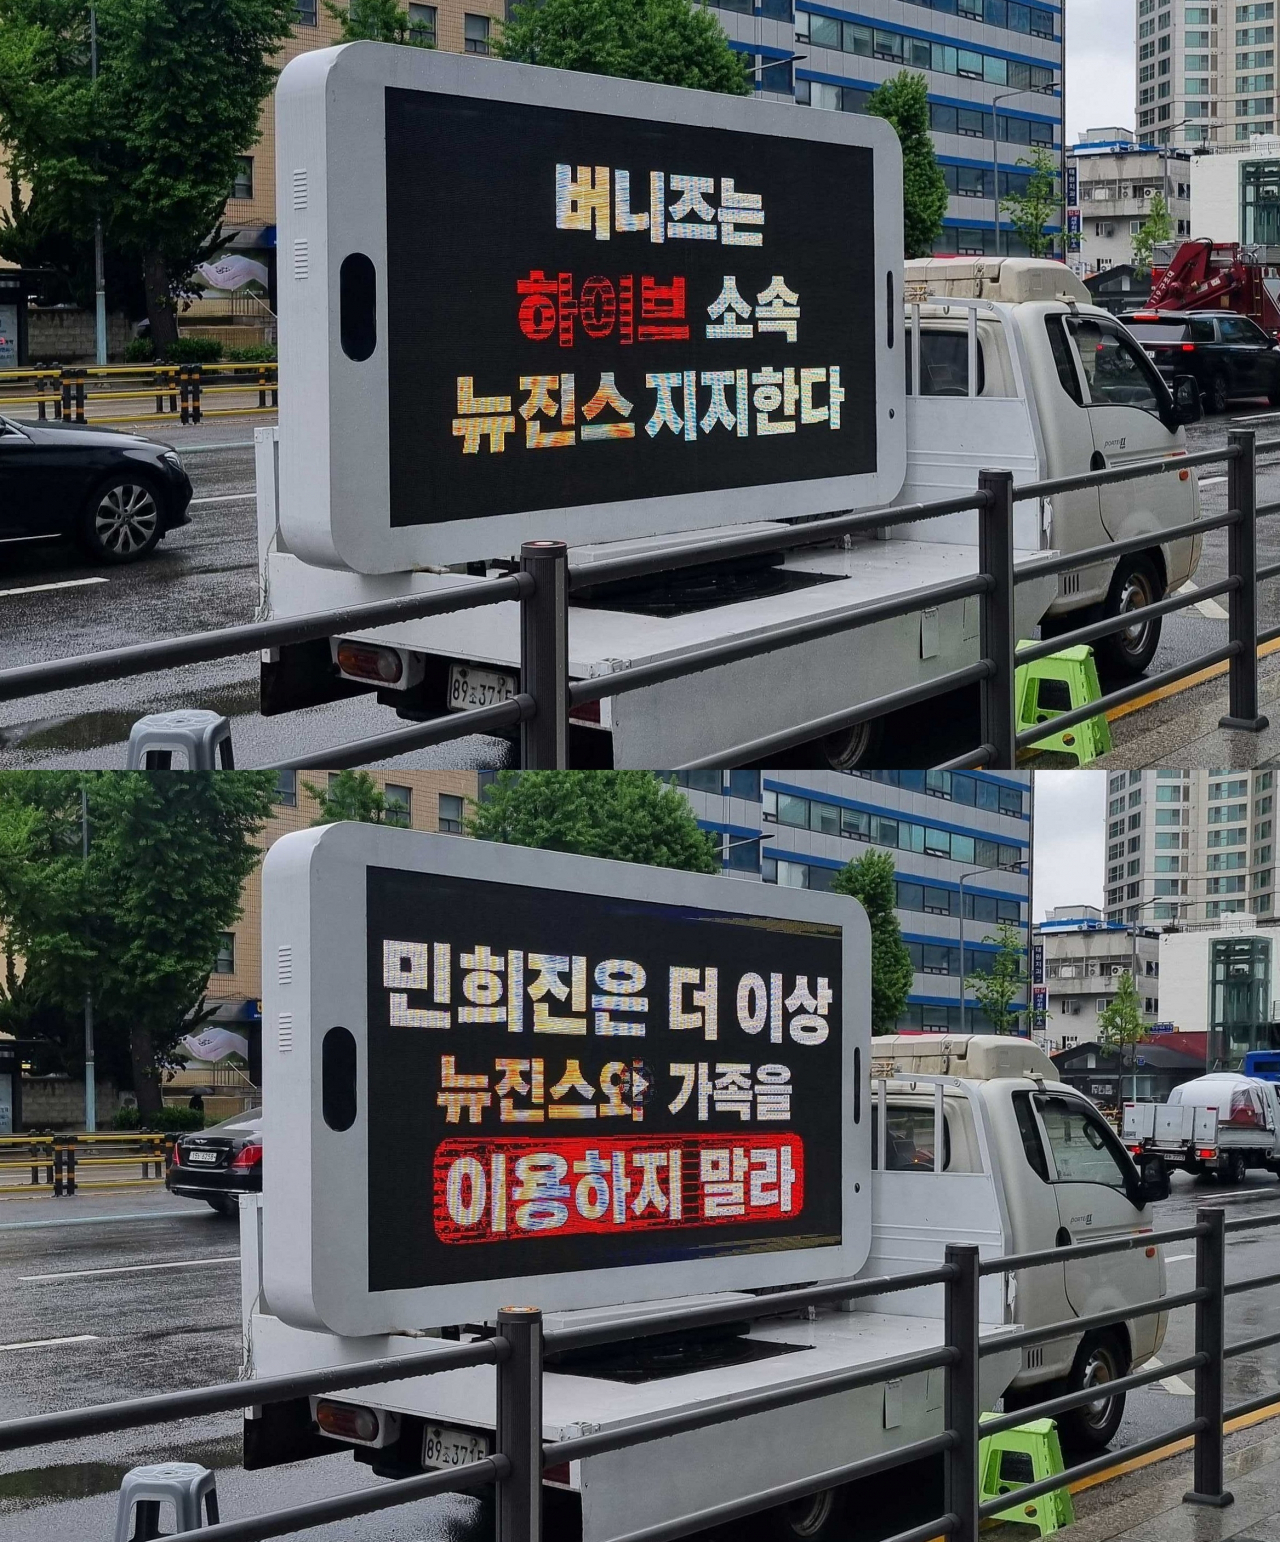 This image provided by a reader shows a protest truck deployed by fans of NewJeans outside the building of K-pop giant Hybe in Seoul on Wednesday. (Yonhap)